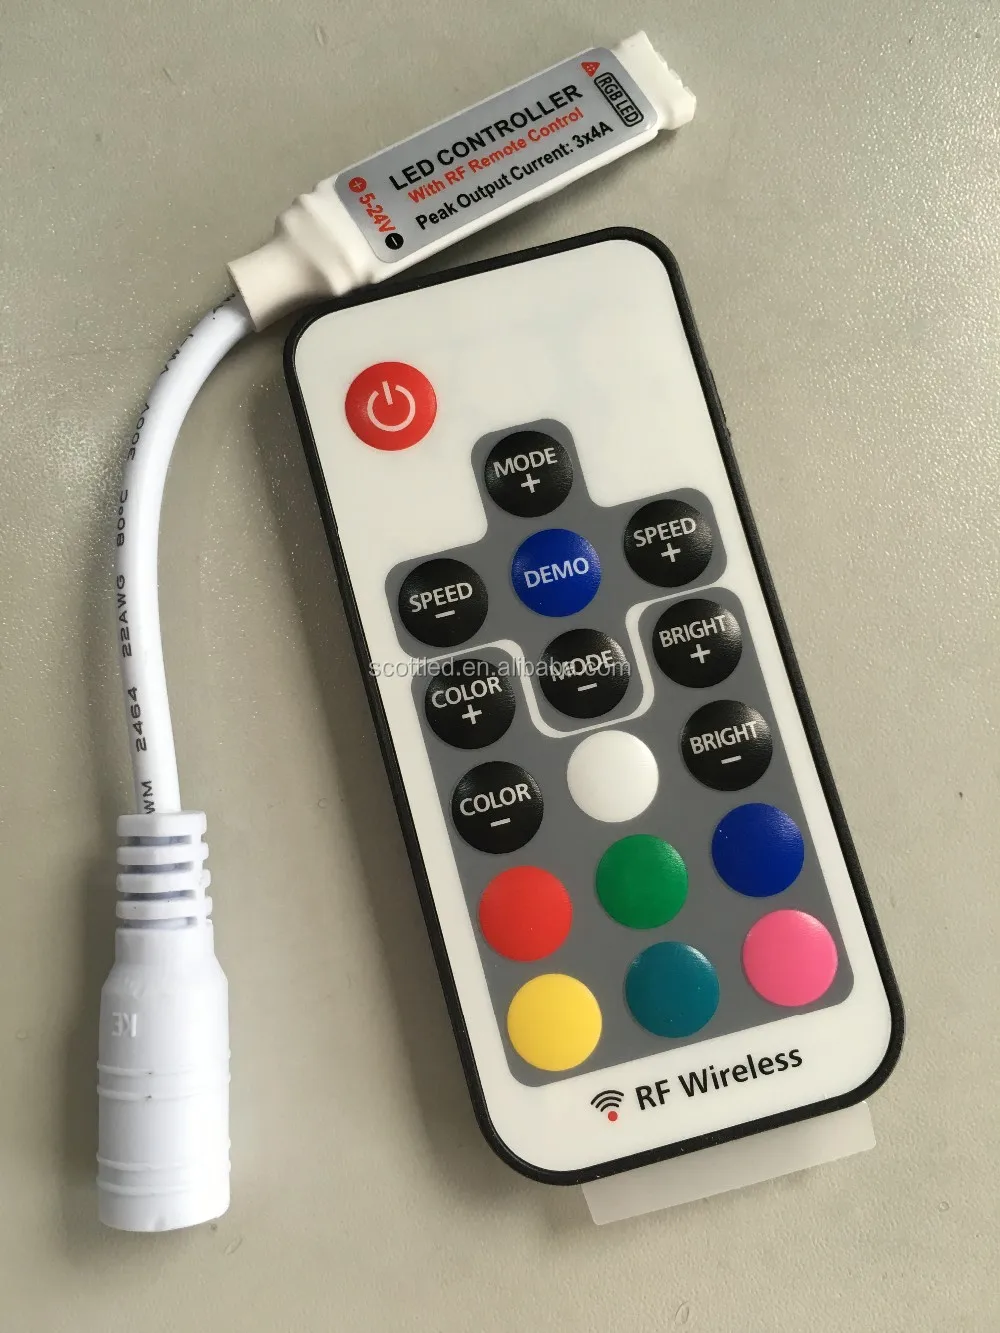 RF Wireless RGB LED Controller with 17-Key Wireless Remote Control Dimmer for 5050 Strip Lights